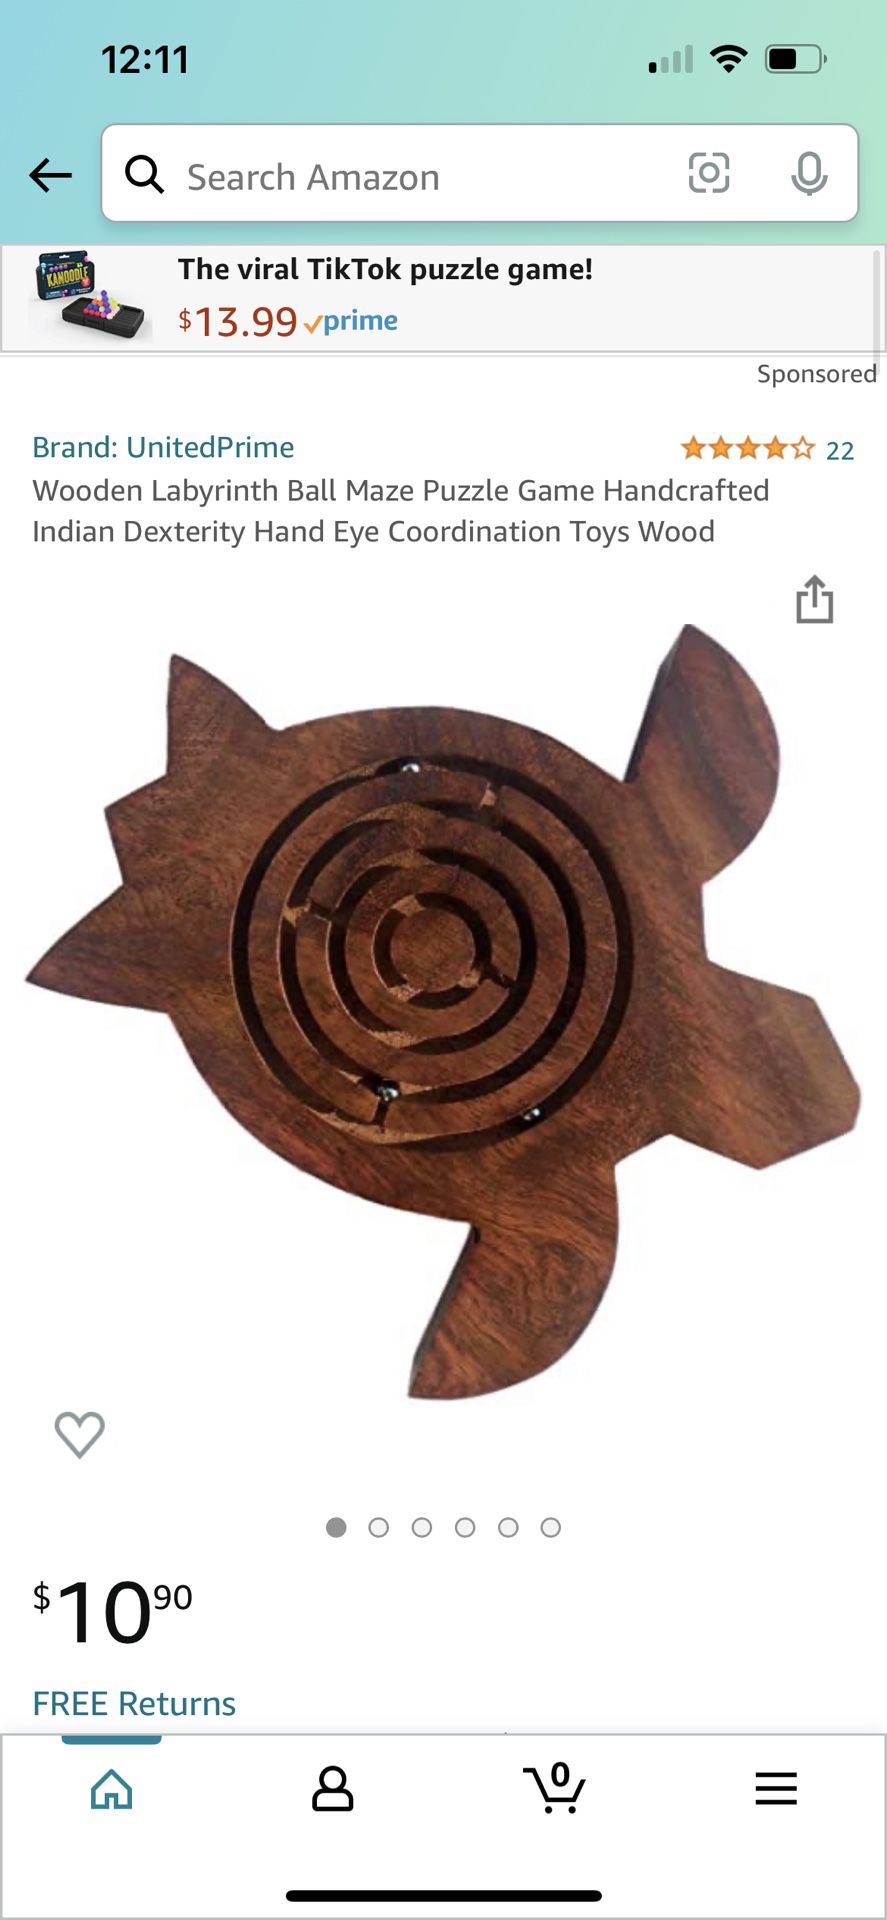 Wooden Labyrinth Ball Maze Puzzle Game Handcrafted Indian Dexterity Hand Eye Coordination Toys Wood